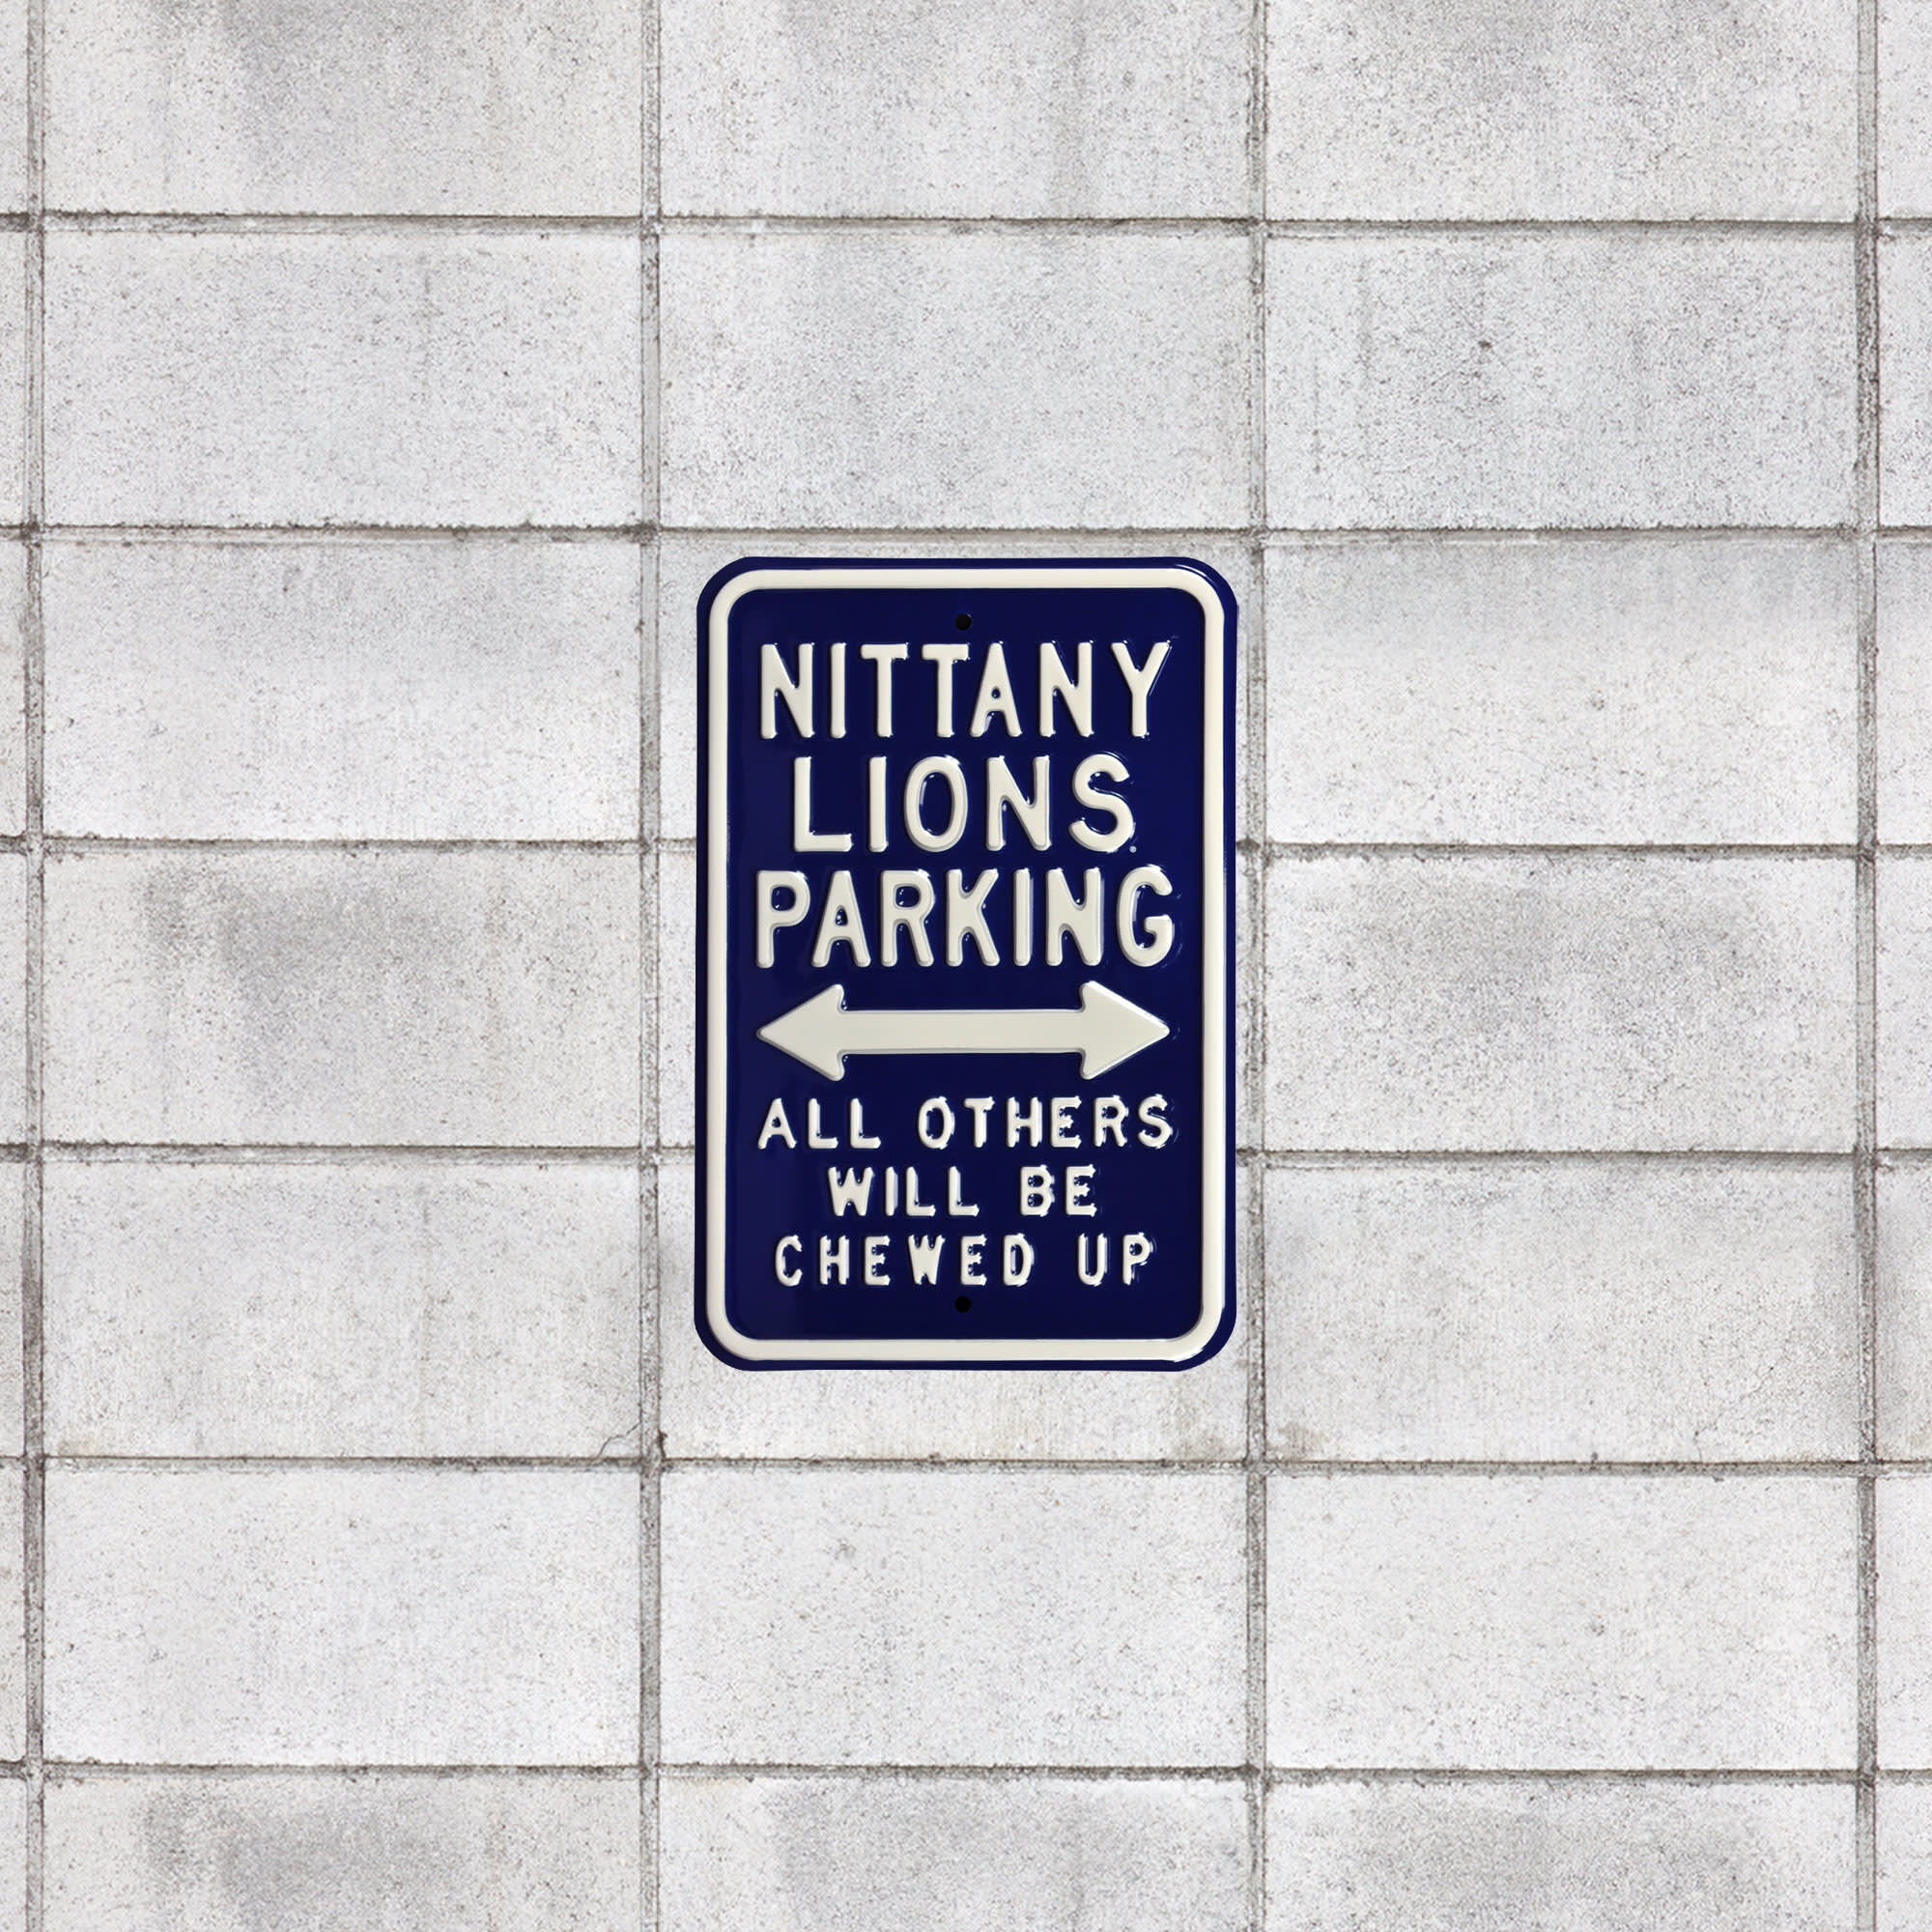 Penn State Nittany Lions: Chewed Up Parking - Officially Licensed Metal Street Sign 18.0"W x 12.0"H by Fathead | 100% Steel